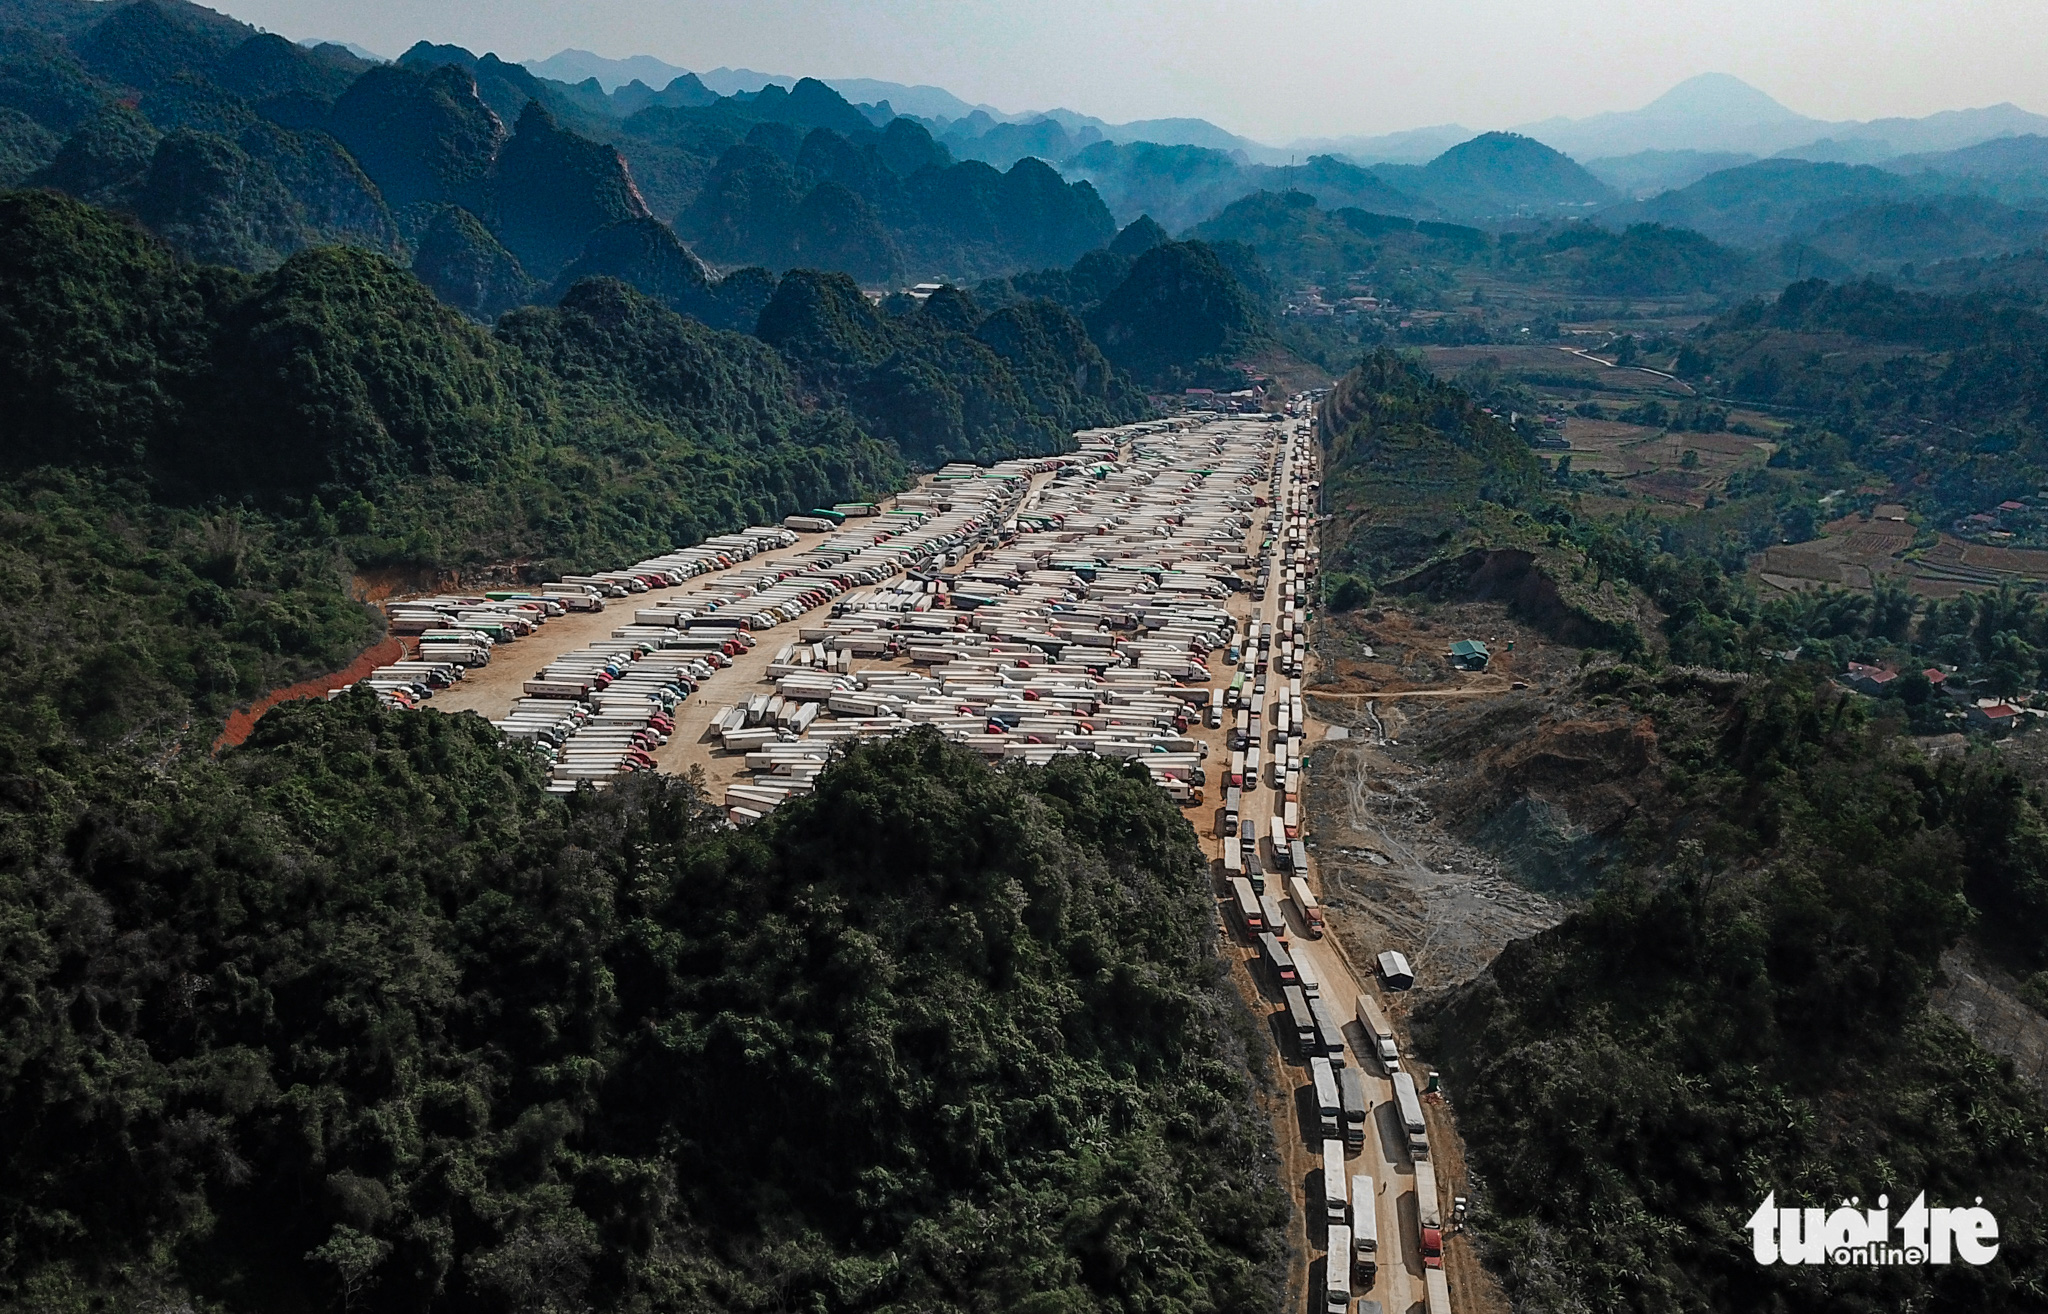 Thousands of tractor-trailers wait for product clearance at Tan Thanh Border Gate in Lang Son Province, December 18, 2021. Photo: Nam Tran / Tuoi Tre